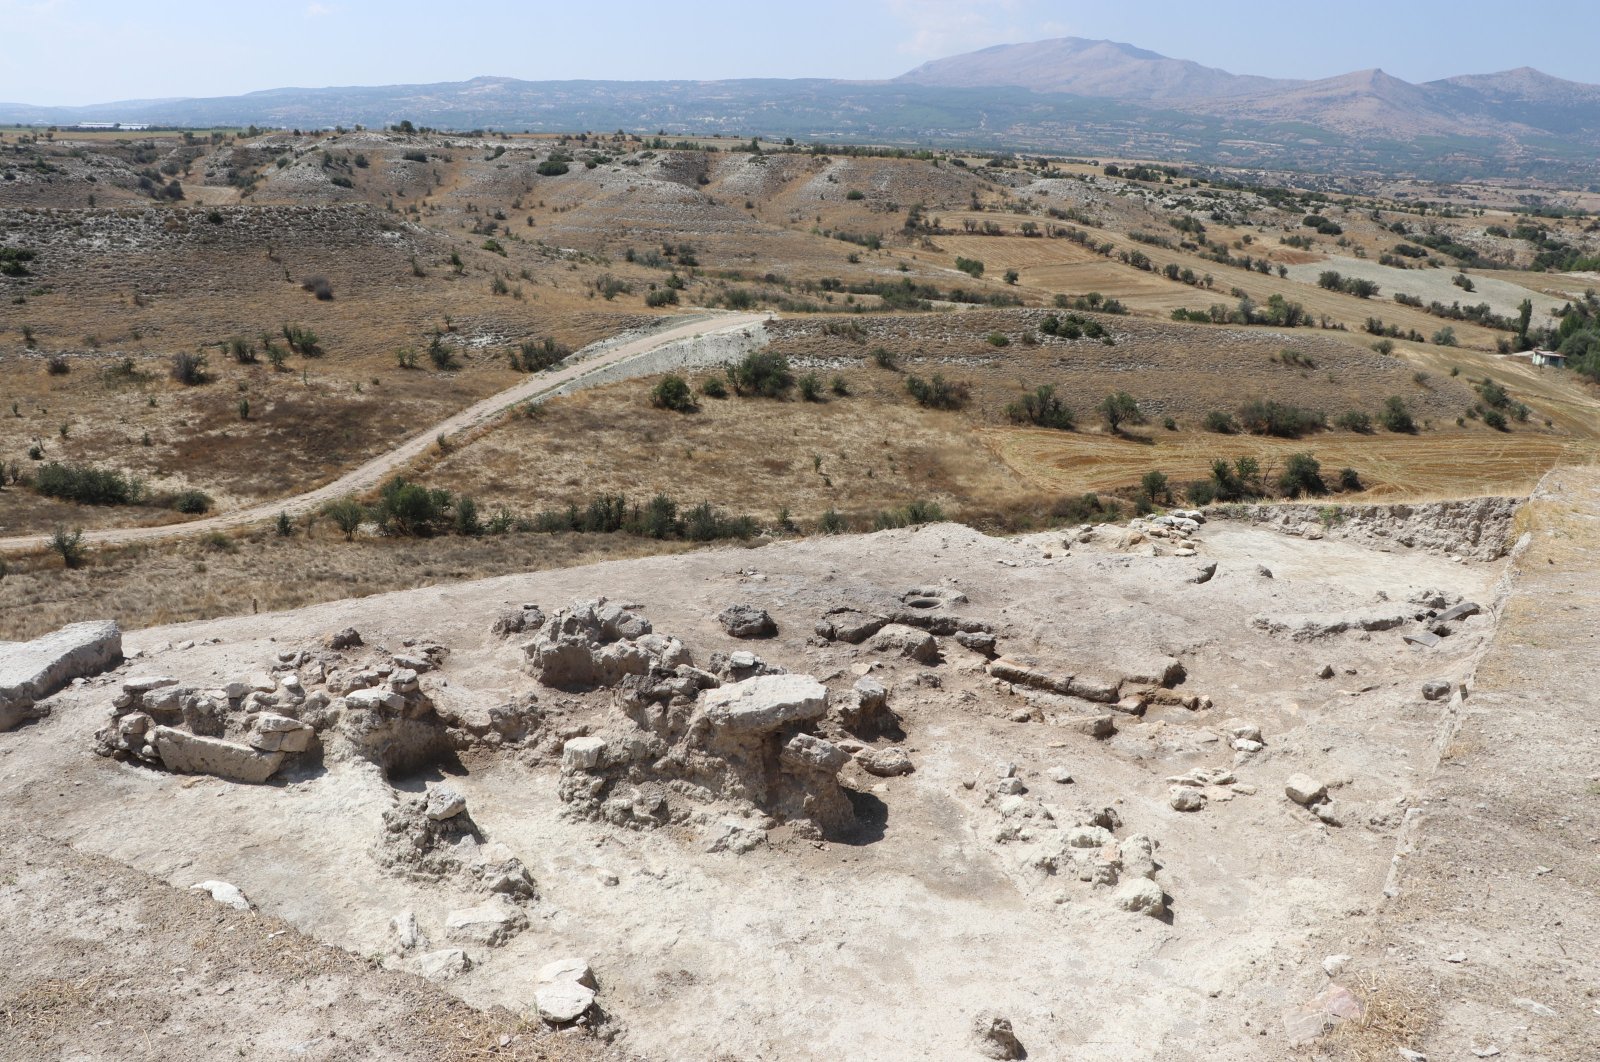 In the excavations at Aşağıseyit Höyük, located in the Çal district, remains of a grape seed estimated to be 3,500 years old were discovered, Denizli, Türkiye, Sept. 8, 2023. (AA Photo)